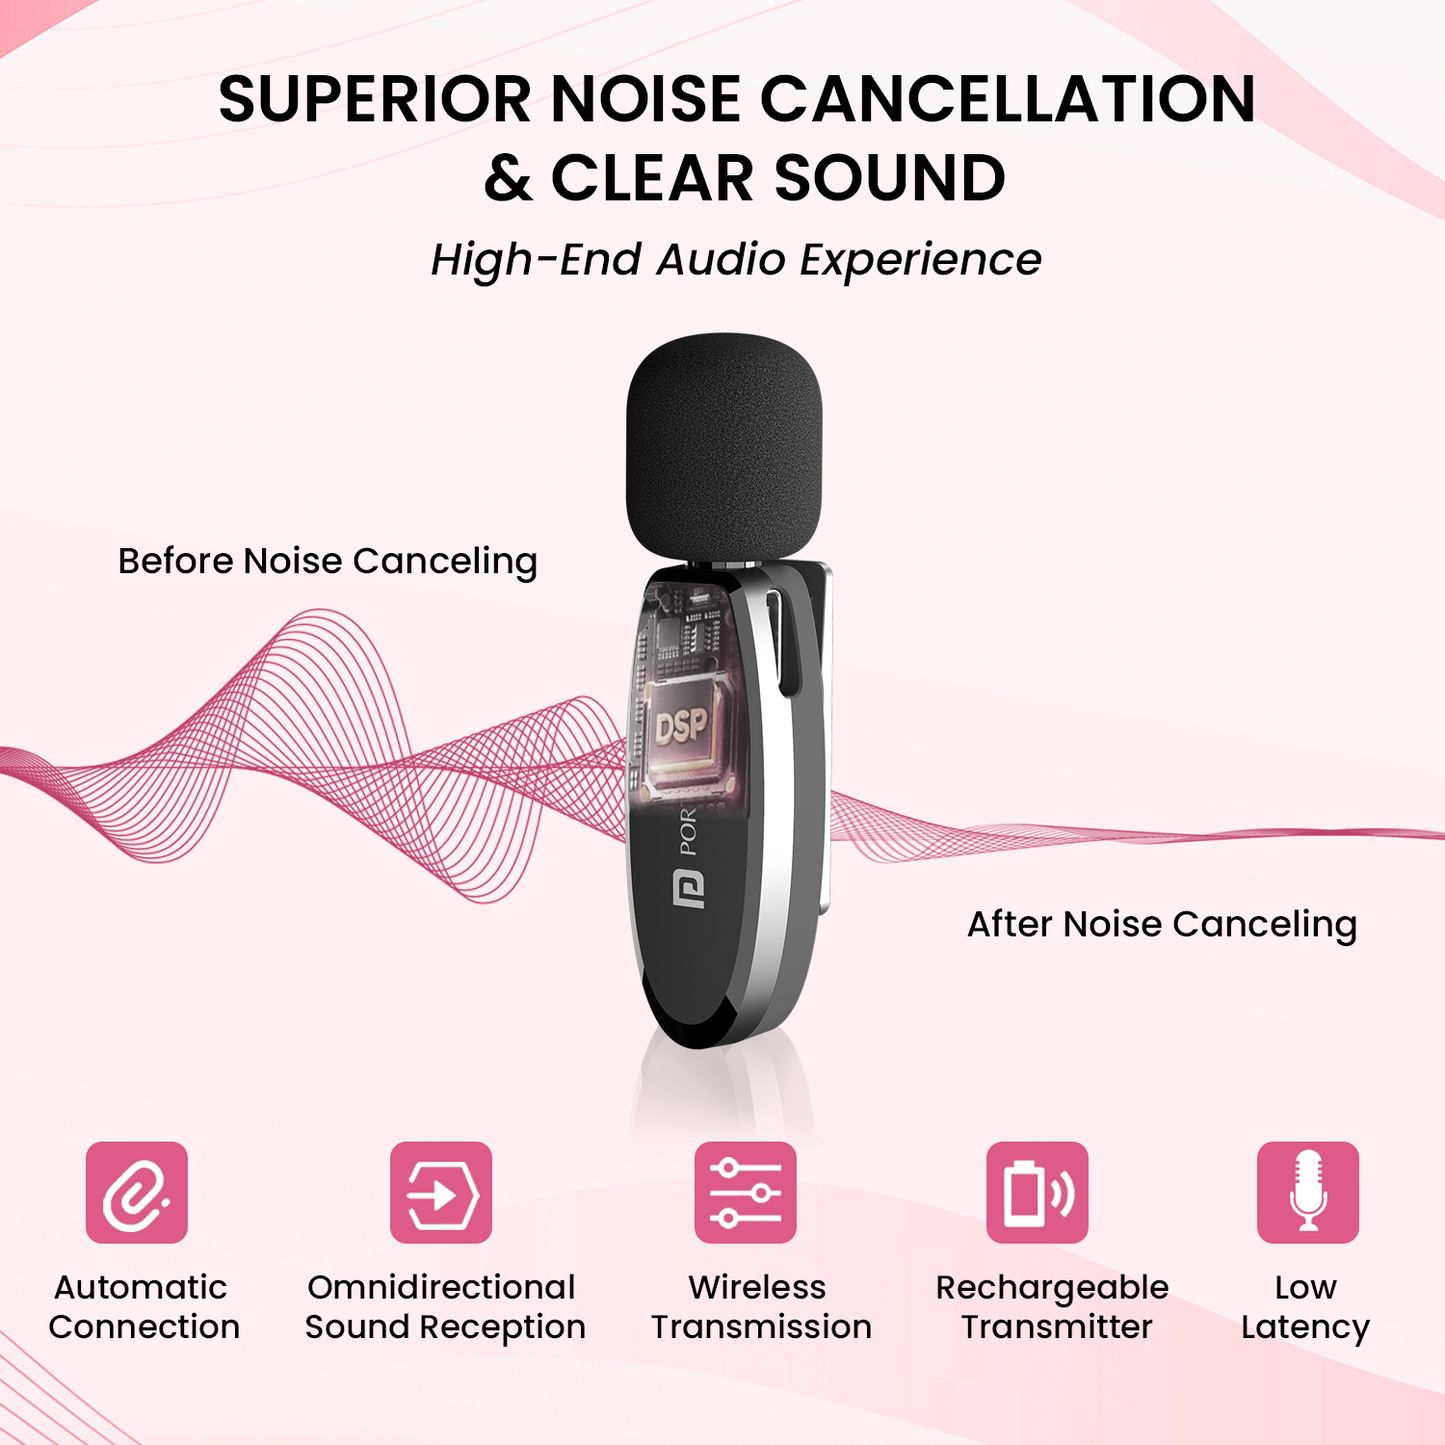 Portronics dash 5 omni direction wireless microphone audio accessories comes with noise cancellation. Black